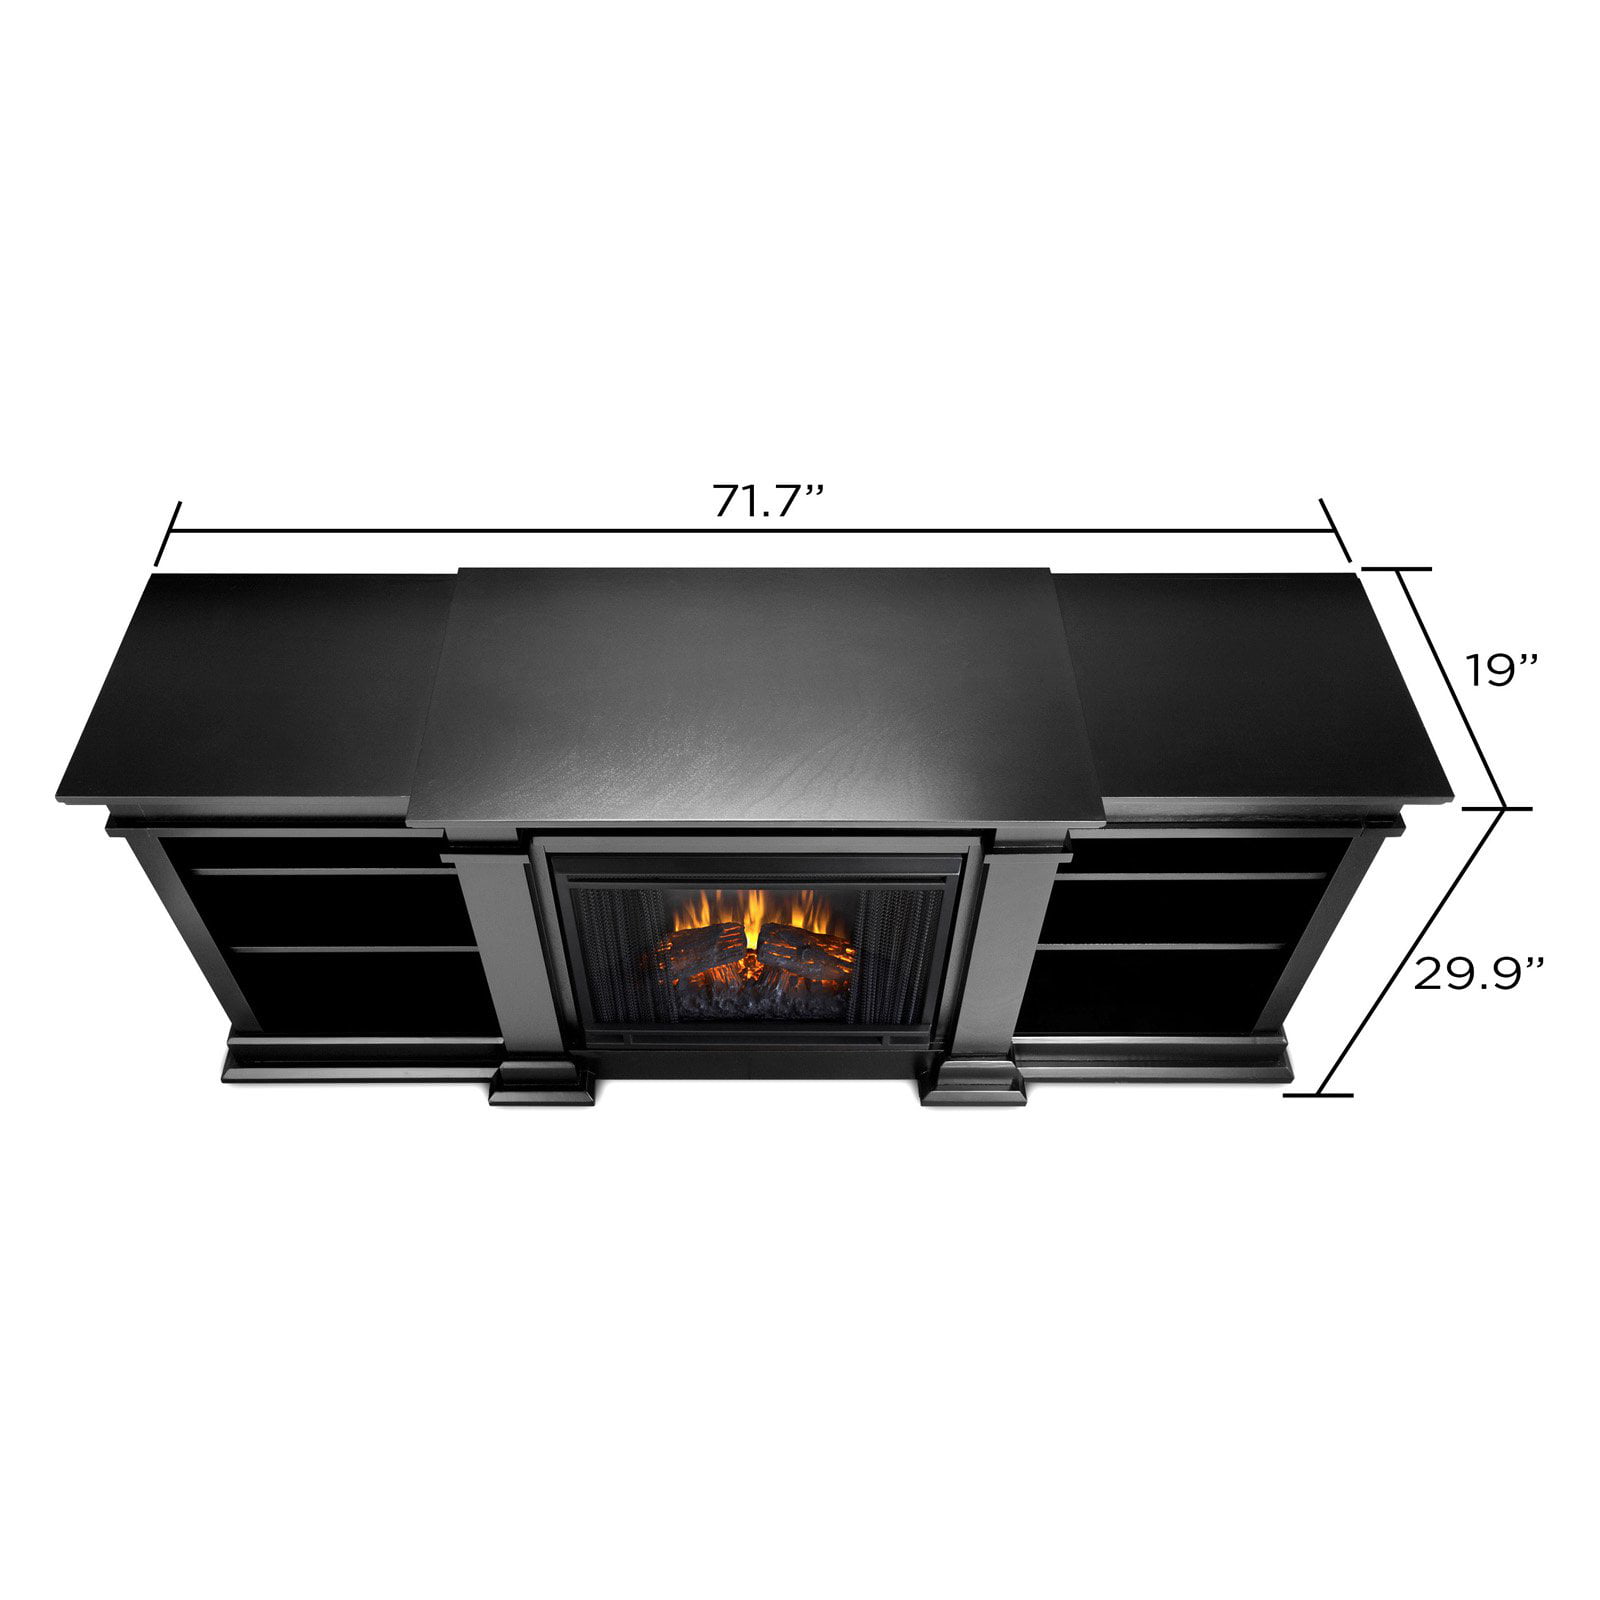 Free Shipping. Buy Real Flame Fresno Electric Fireplace - Black at Walmart.com